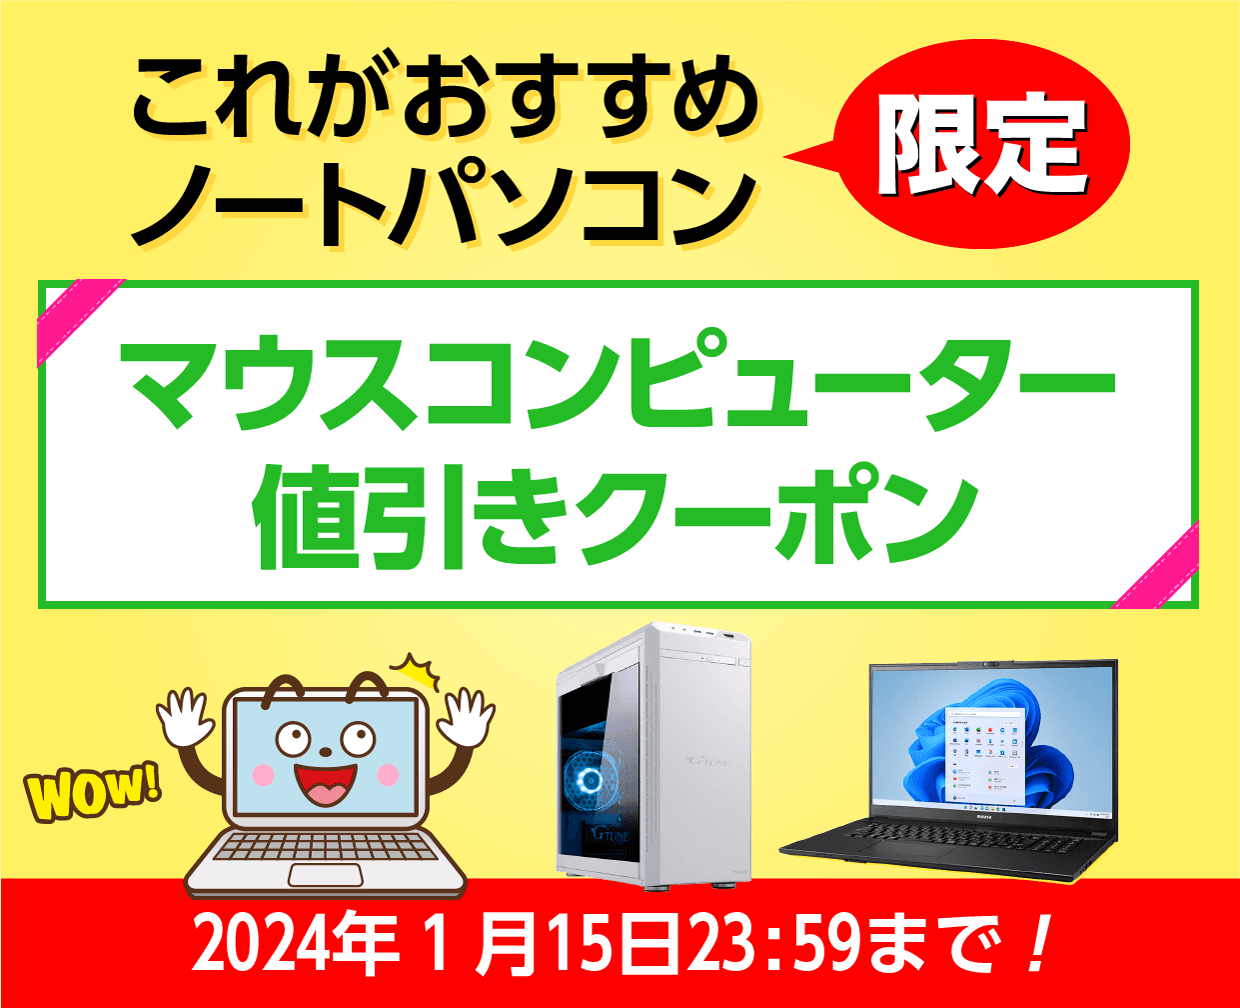 Mouse 21015P-CML 値下げ◯ - ノートPC